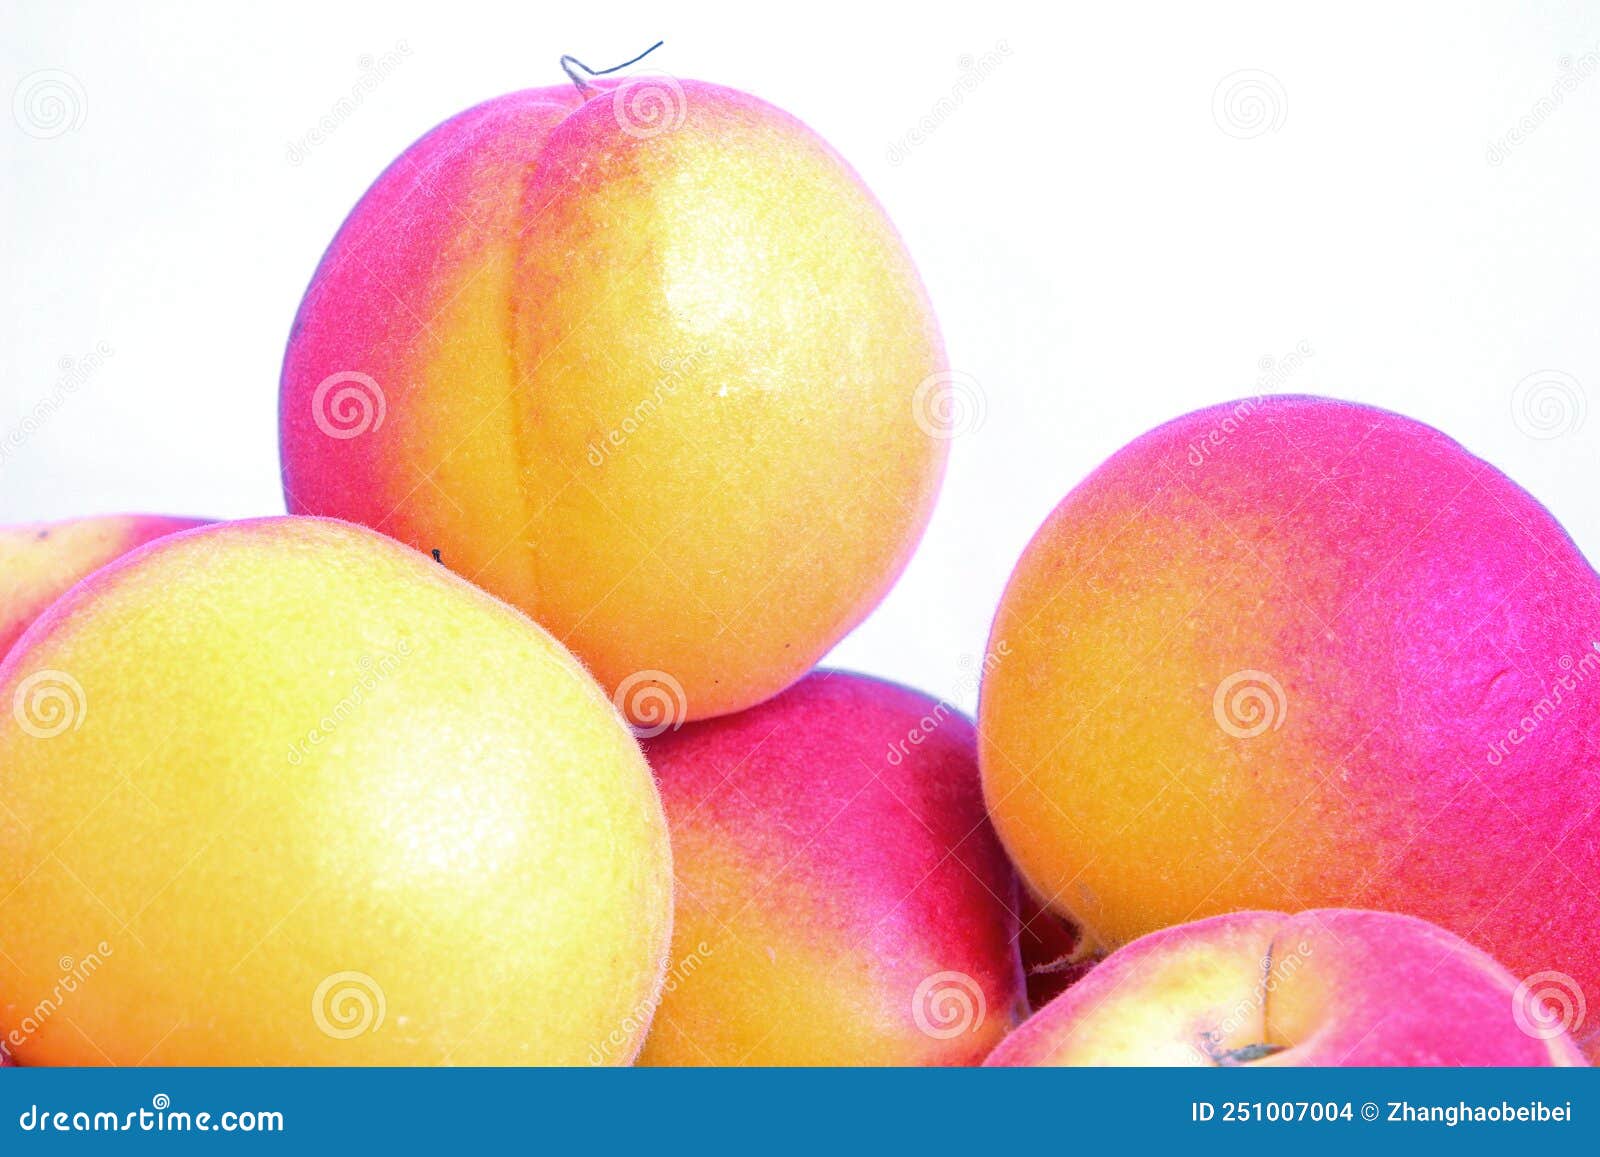 Damasco Fruta Royalty-Free Images, Stock Photos & Pictures